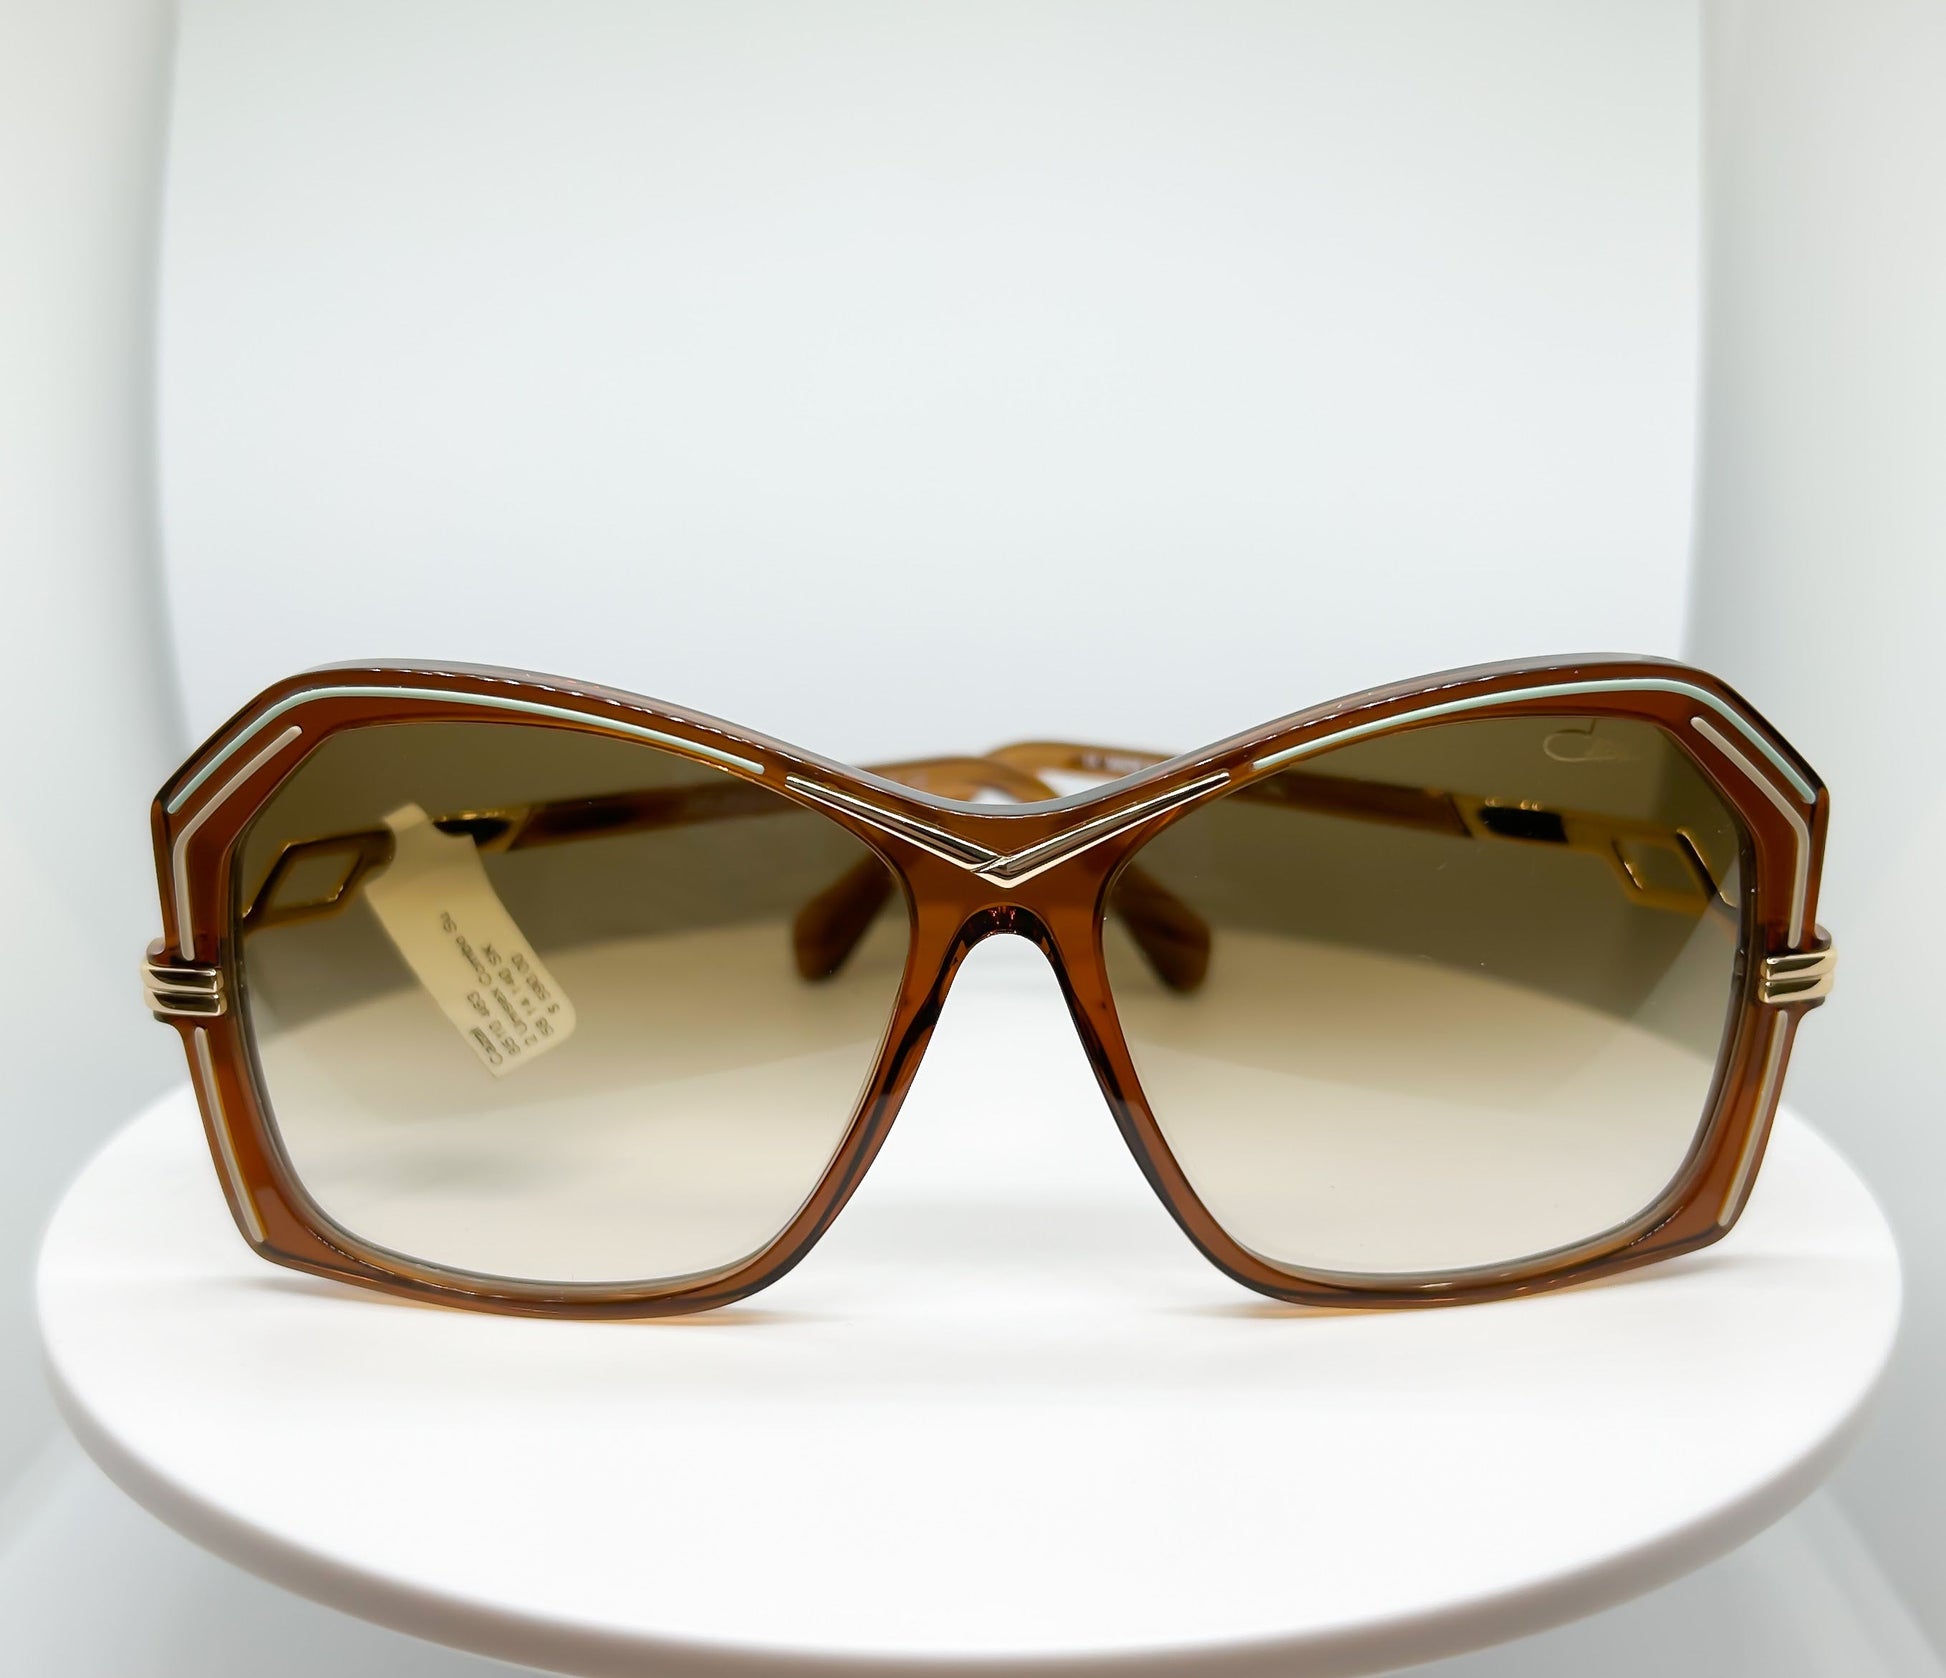 <p>CAZAL 8510 is a  Brown, Turqoise, Brown Gradient Lens,  Titanium, Acetate  Sunglasses Frame with a Oval shape.  </p><p>Shop with confidence from Adair Eyewear, a CAZAL Authorized Dealer.  We have provided the best in customer service and great designer eyweear for over 40 years.</p>